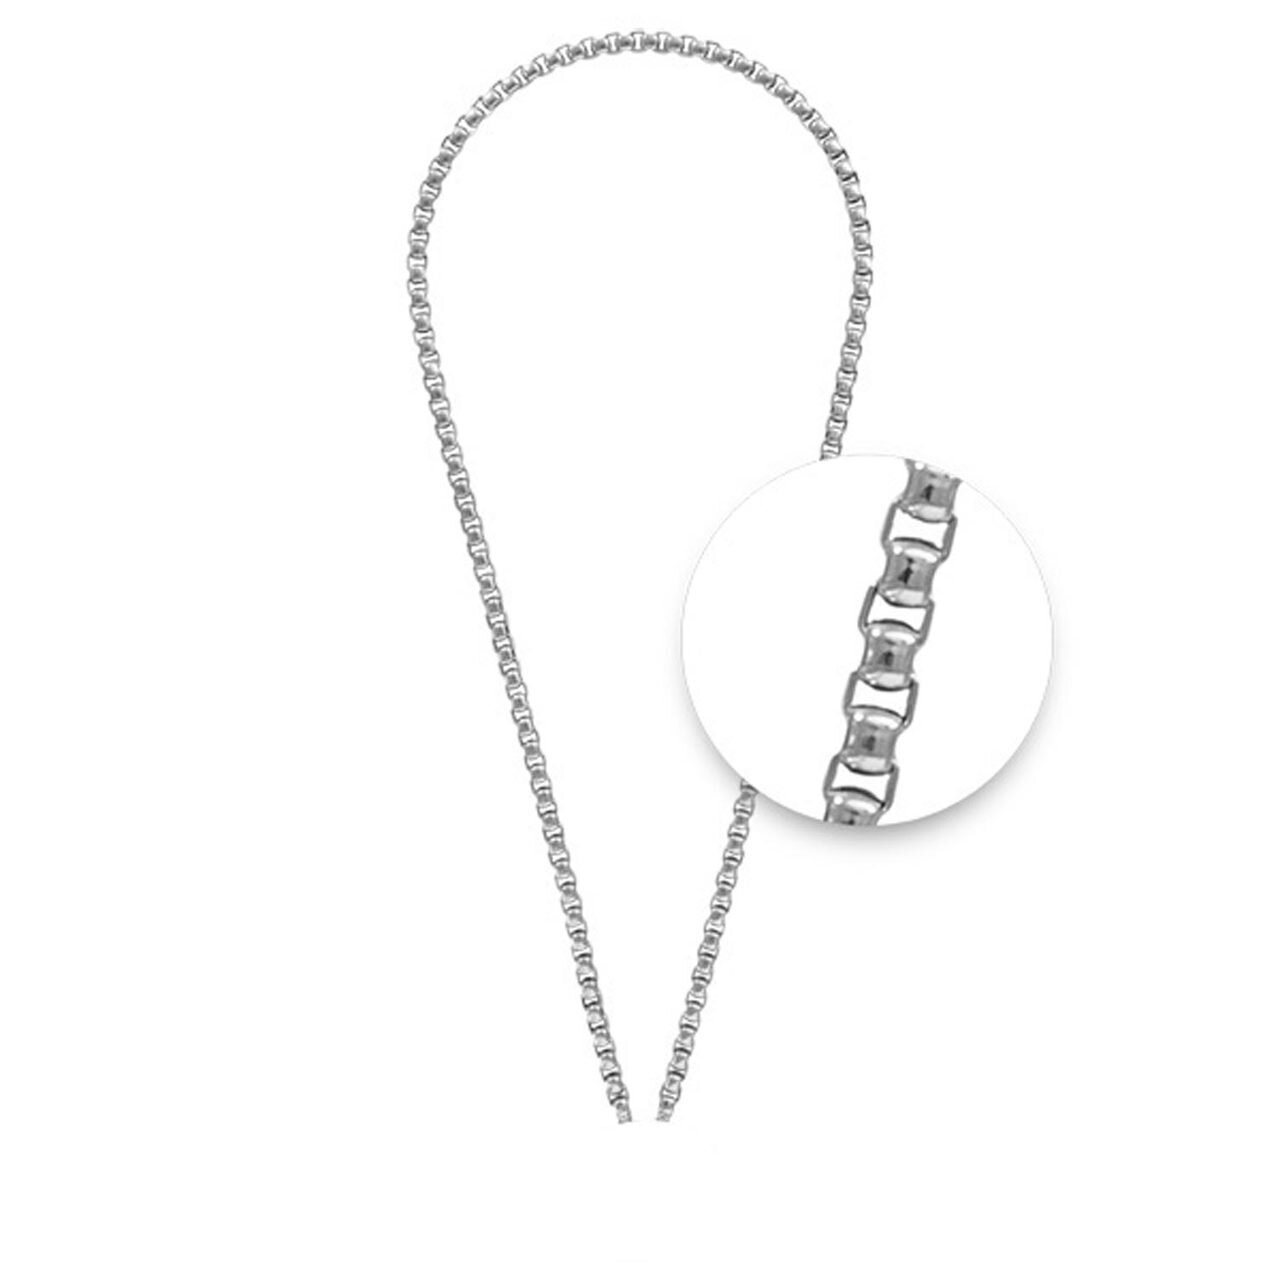 Nikki Lissoni Square Rolo Chain For Tags Silver-plated 45cm N1013S45